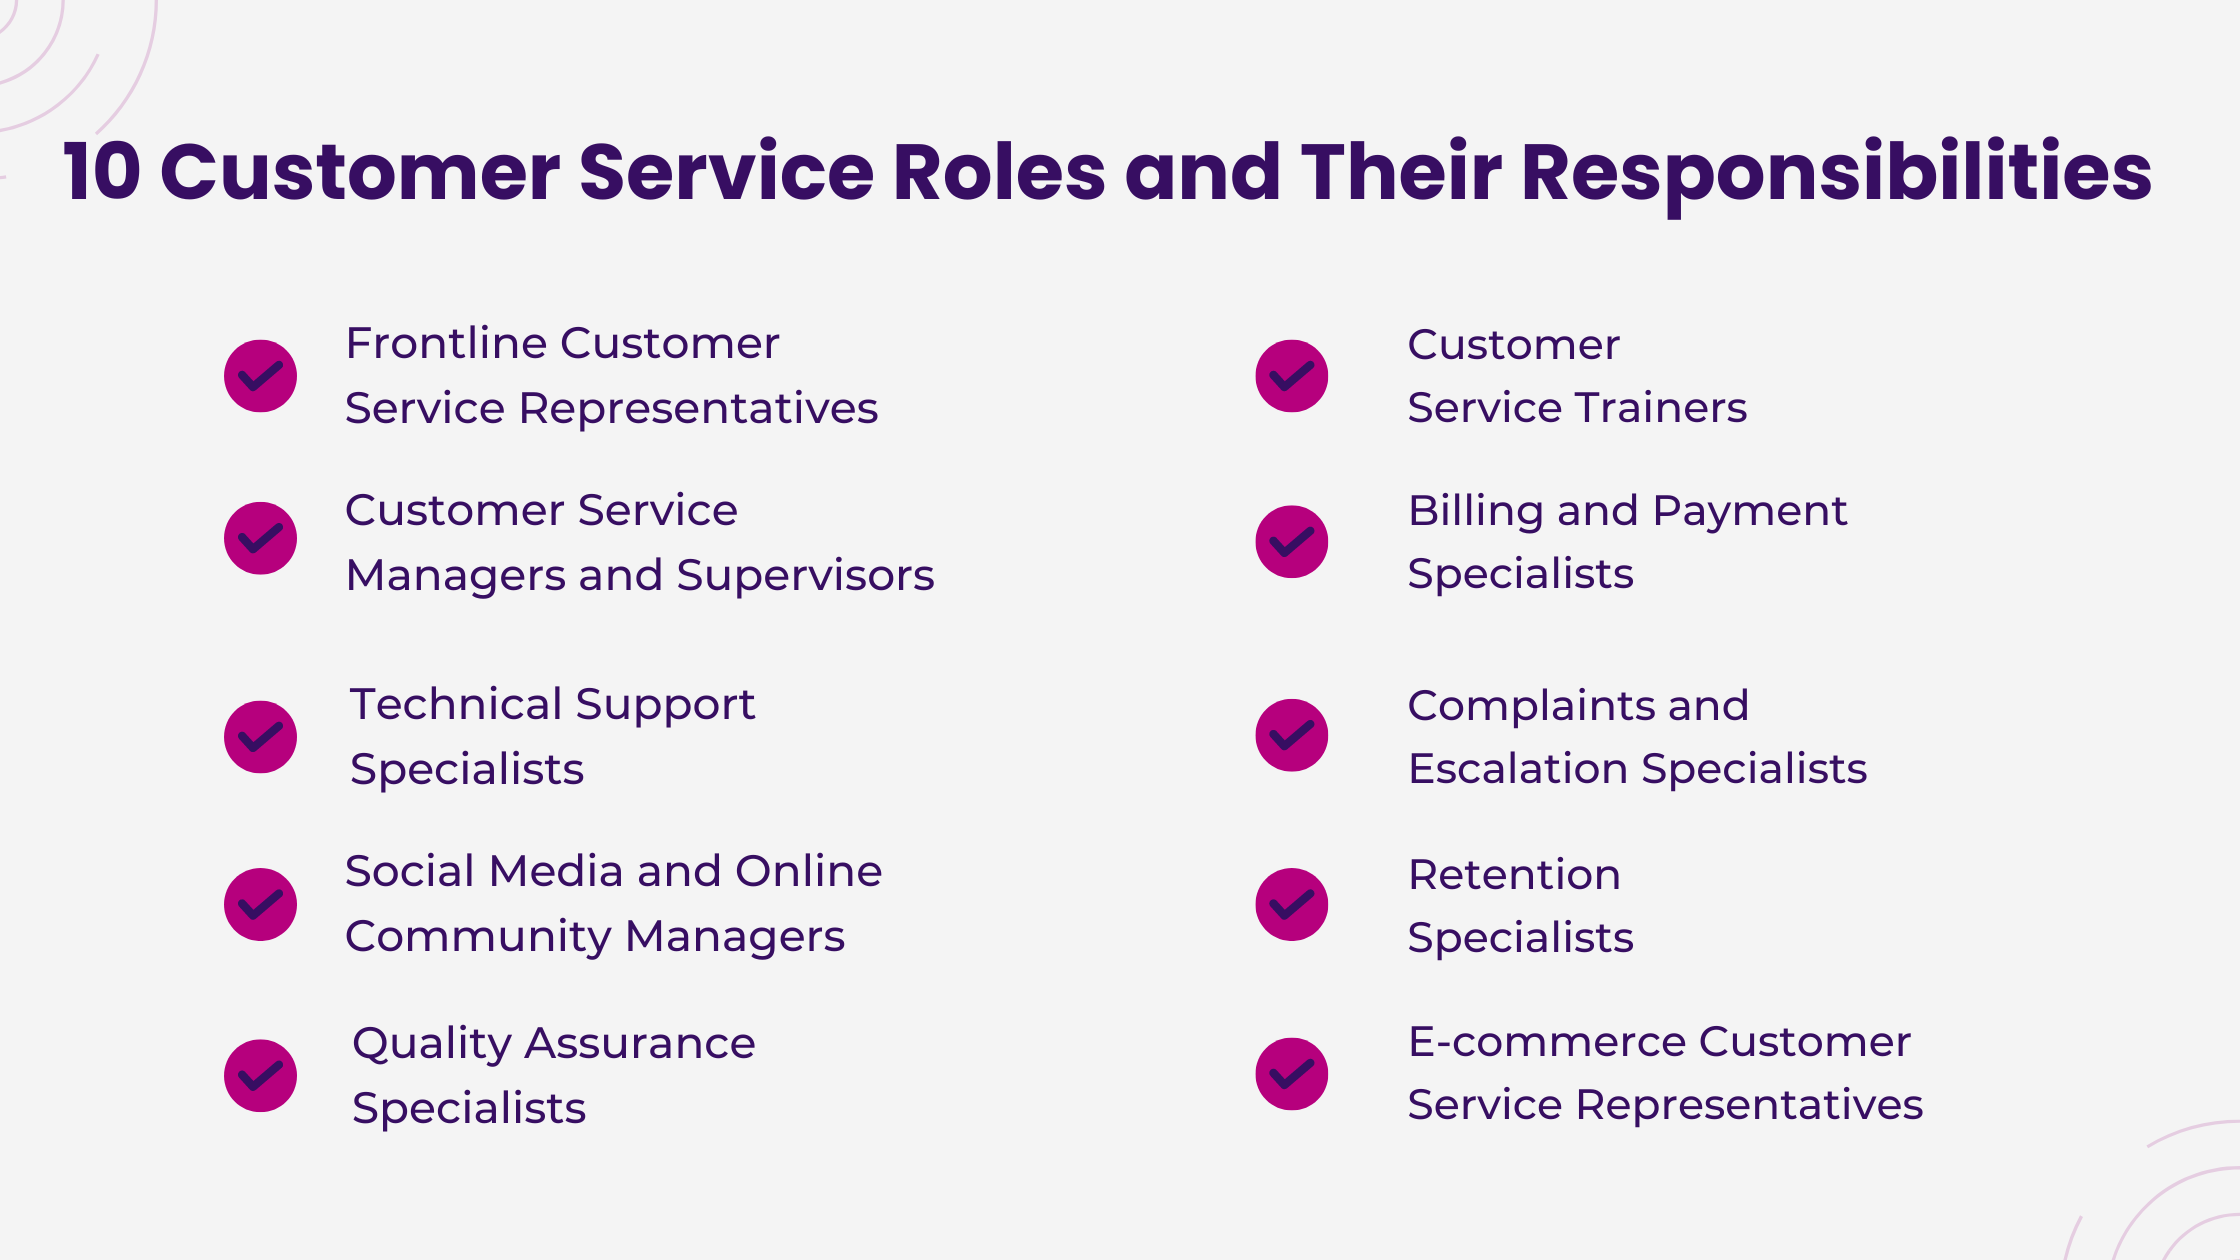 10 Customer Service Roles and Their Responsibilities